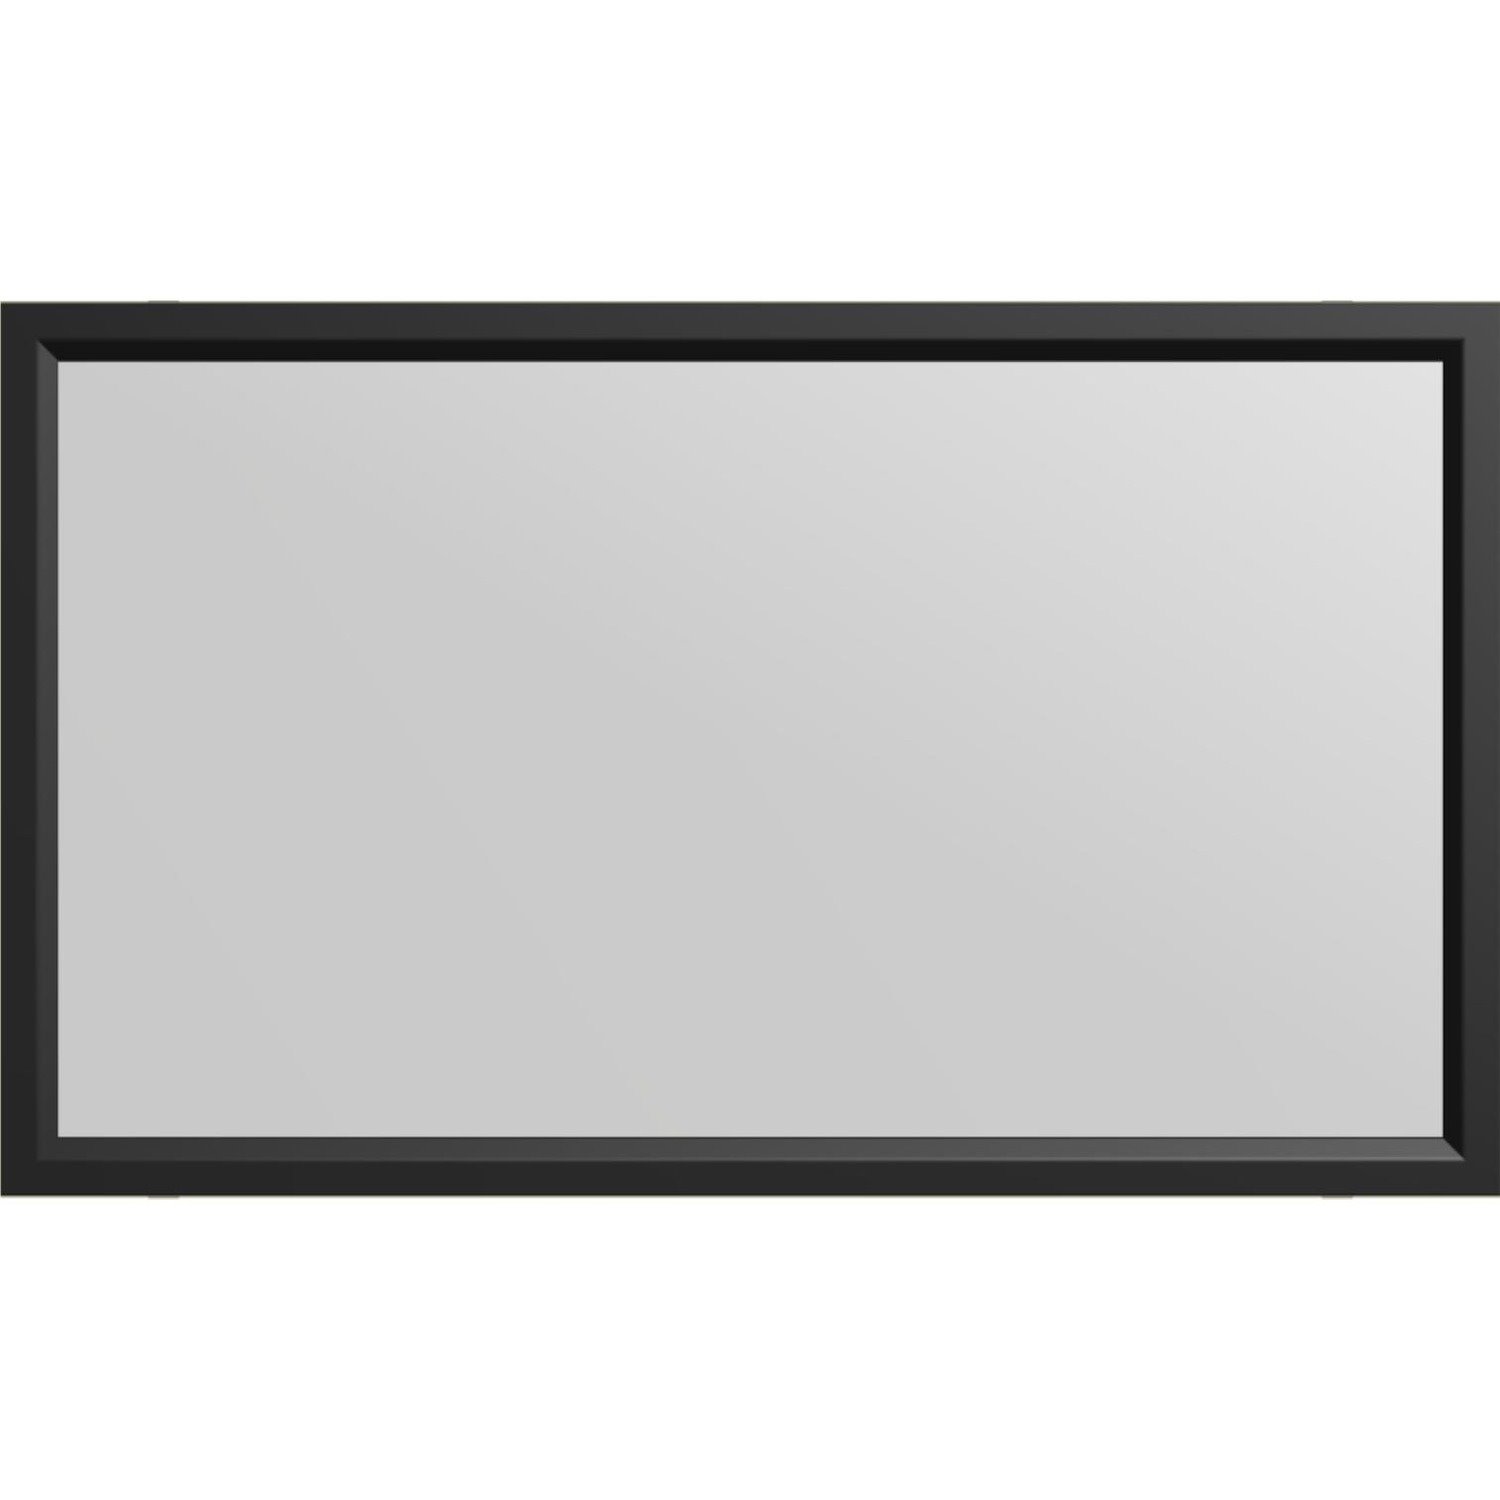 Screen Technics ViewMaster Pro 254 cm (100") Electric Projection Screen